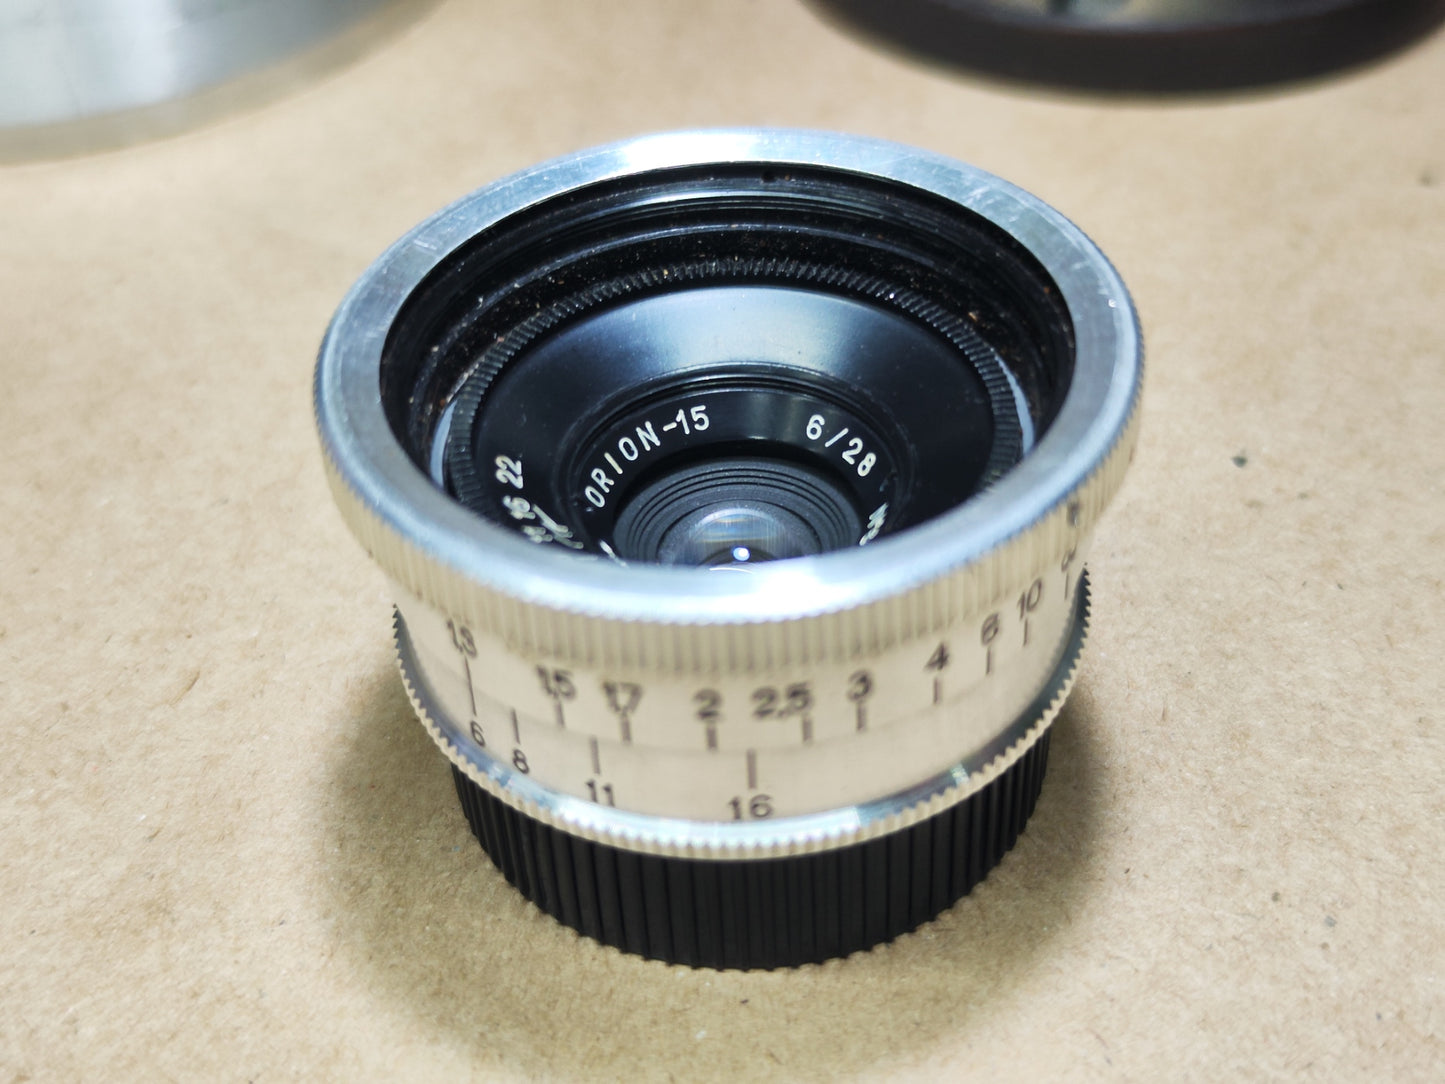 Very rare Orion-15 28mm f/6 wide angle Lens For LTM M39 Leica RF Mount Carl Zeiss Topogon copy